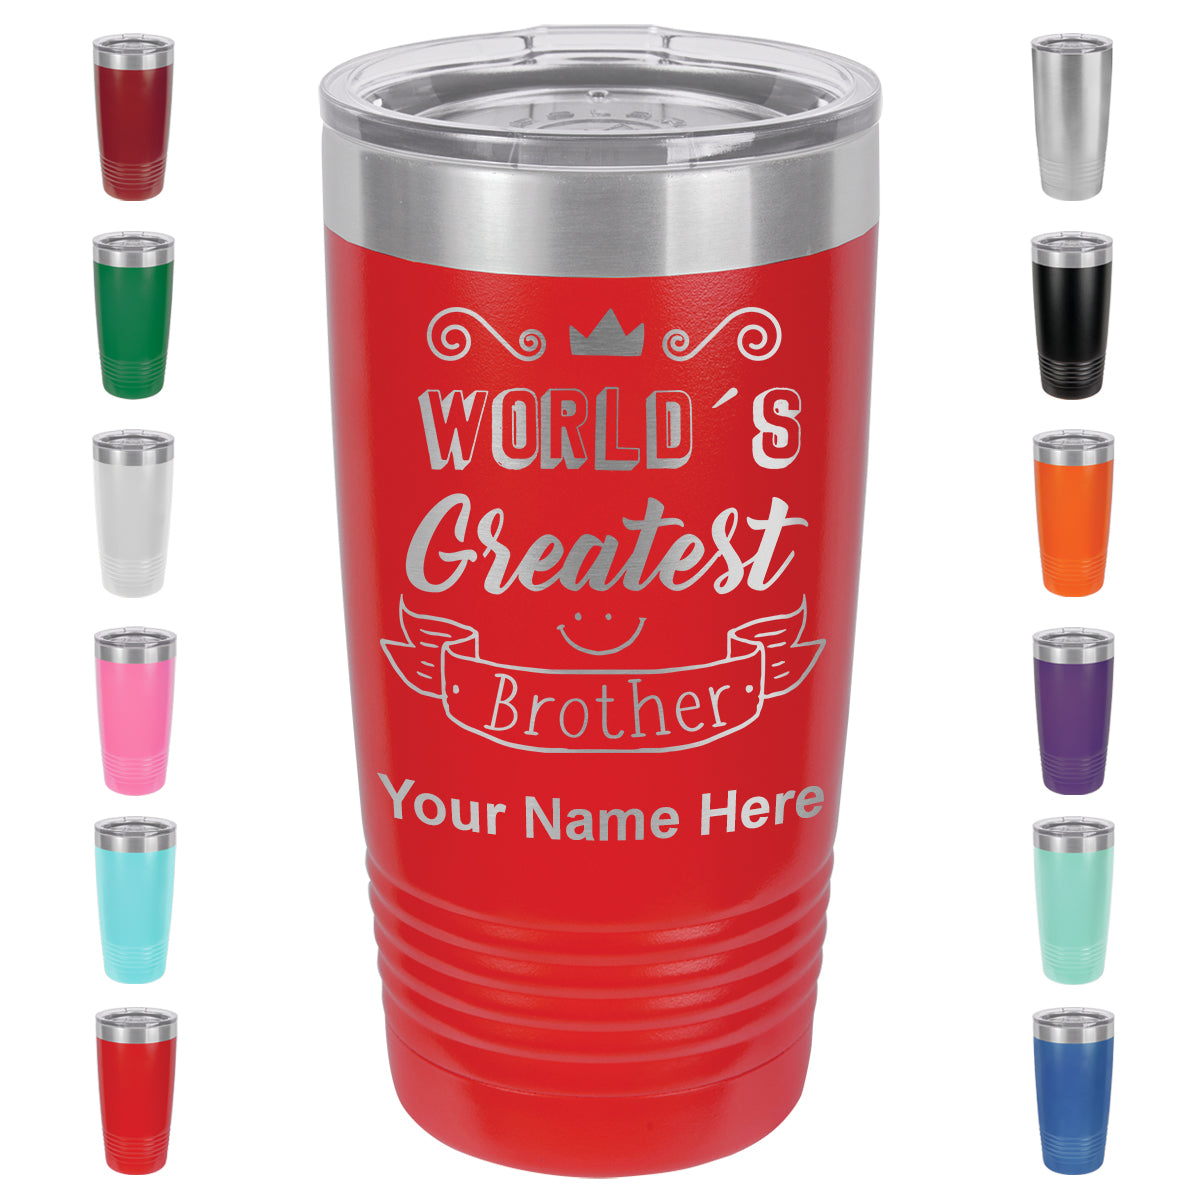 20oz Vacuum Insulated Tumbler Mug, World's Greatest Brother, Personalized Engraving Included